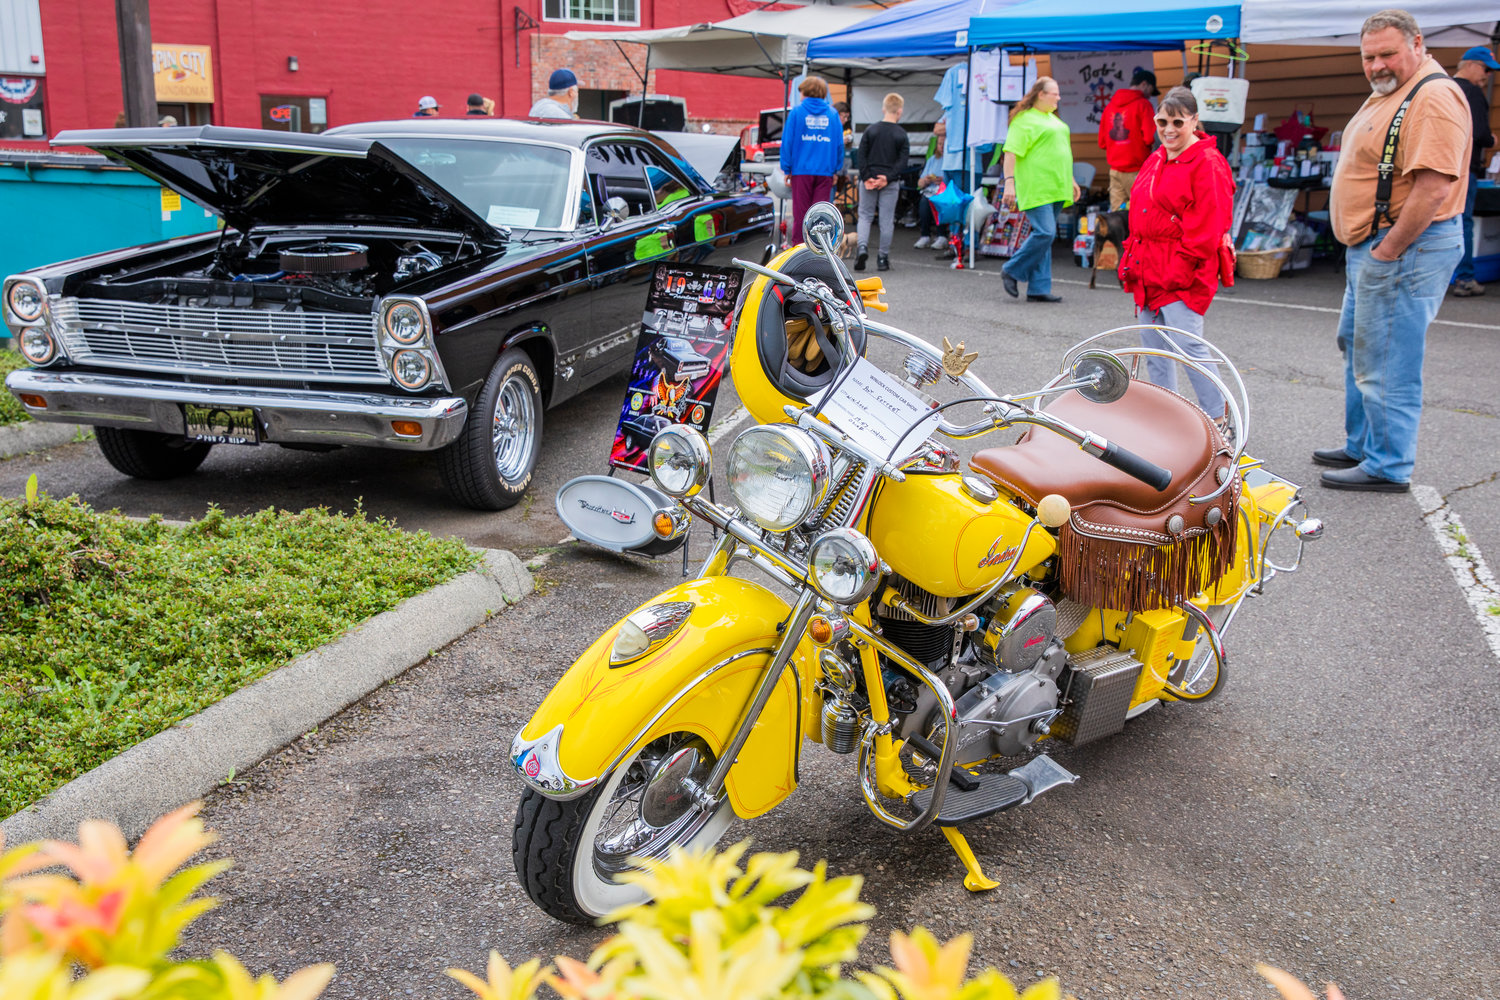 Vintage motorcycles and cars sit on display during the Winlock Custom Car Show on Saturday.